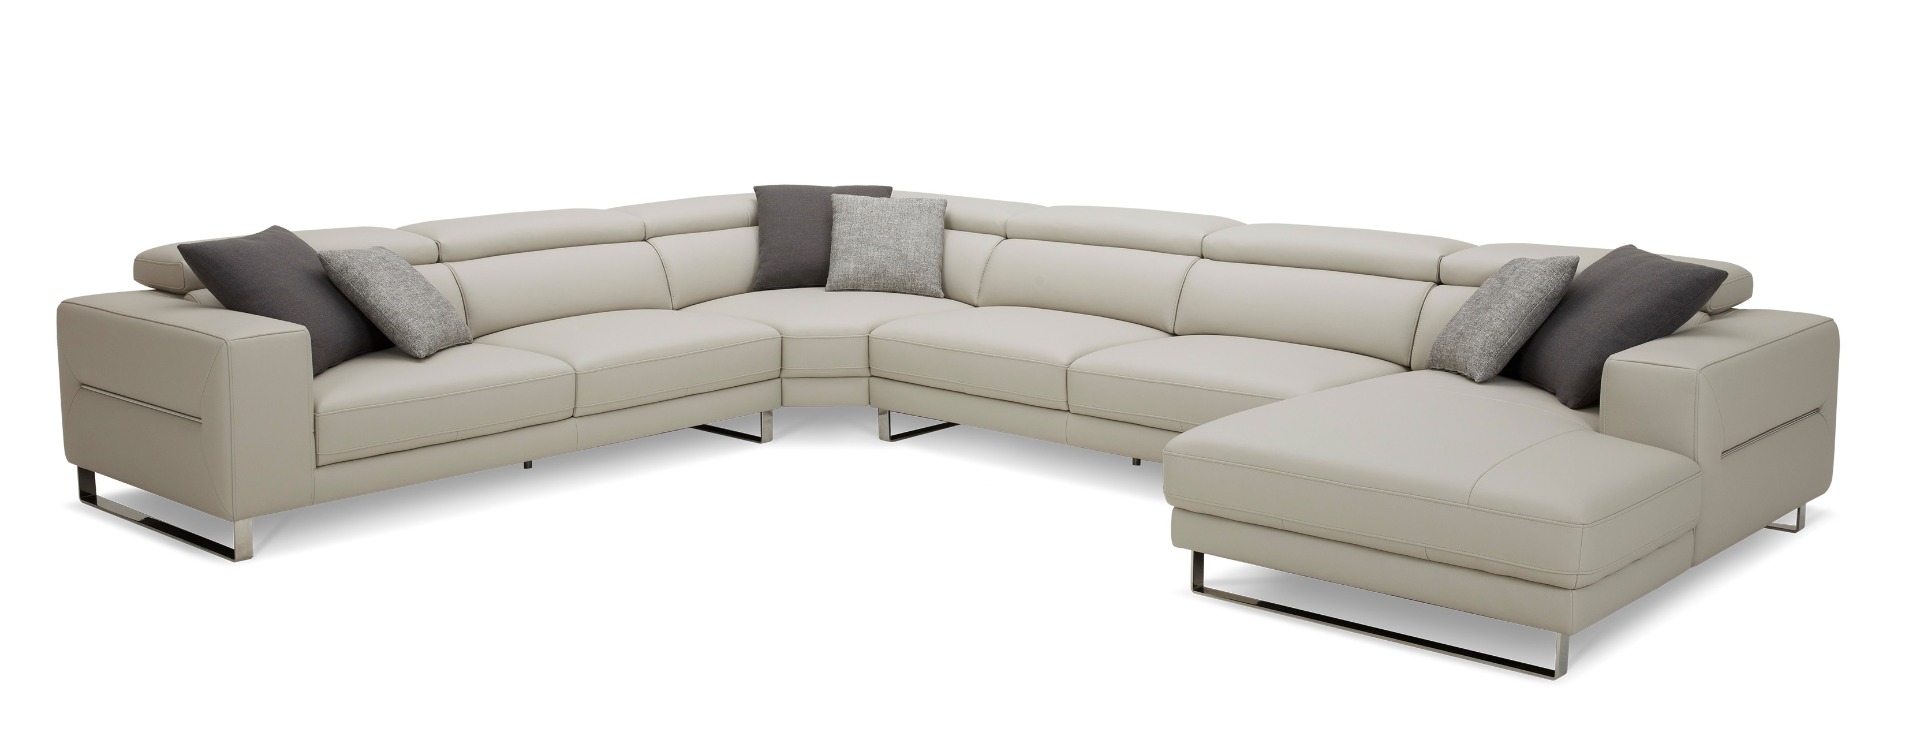 Divani Casa Hawkey – Contemporary Light Grey Leather RAF Chaise Sectional Sofa